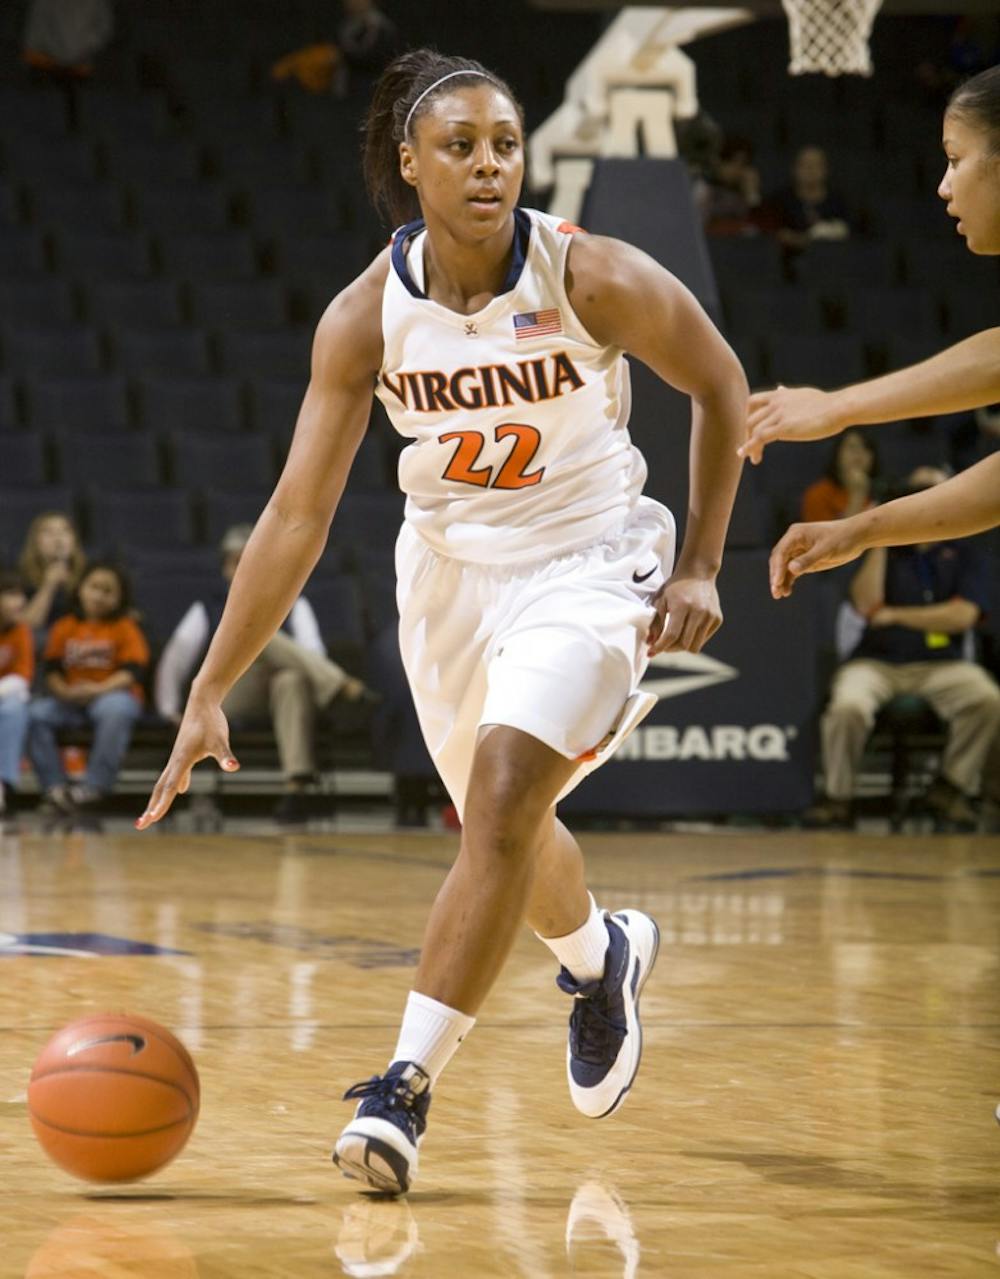 Virginia forward Monica Wright (22) in action against MU.  The Virginia Cavaliers women's basketball team defeated the Monmouth Hawks 71-45 at the John Paul Jones Arena in Charlottesville, VA on December 18, 2008.